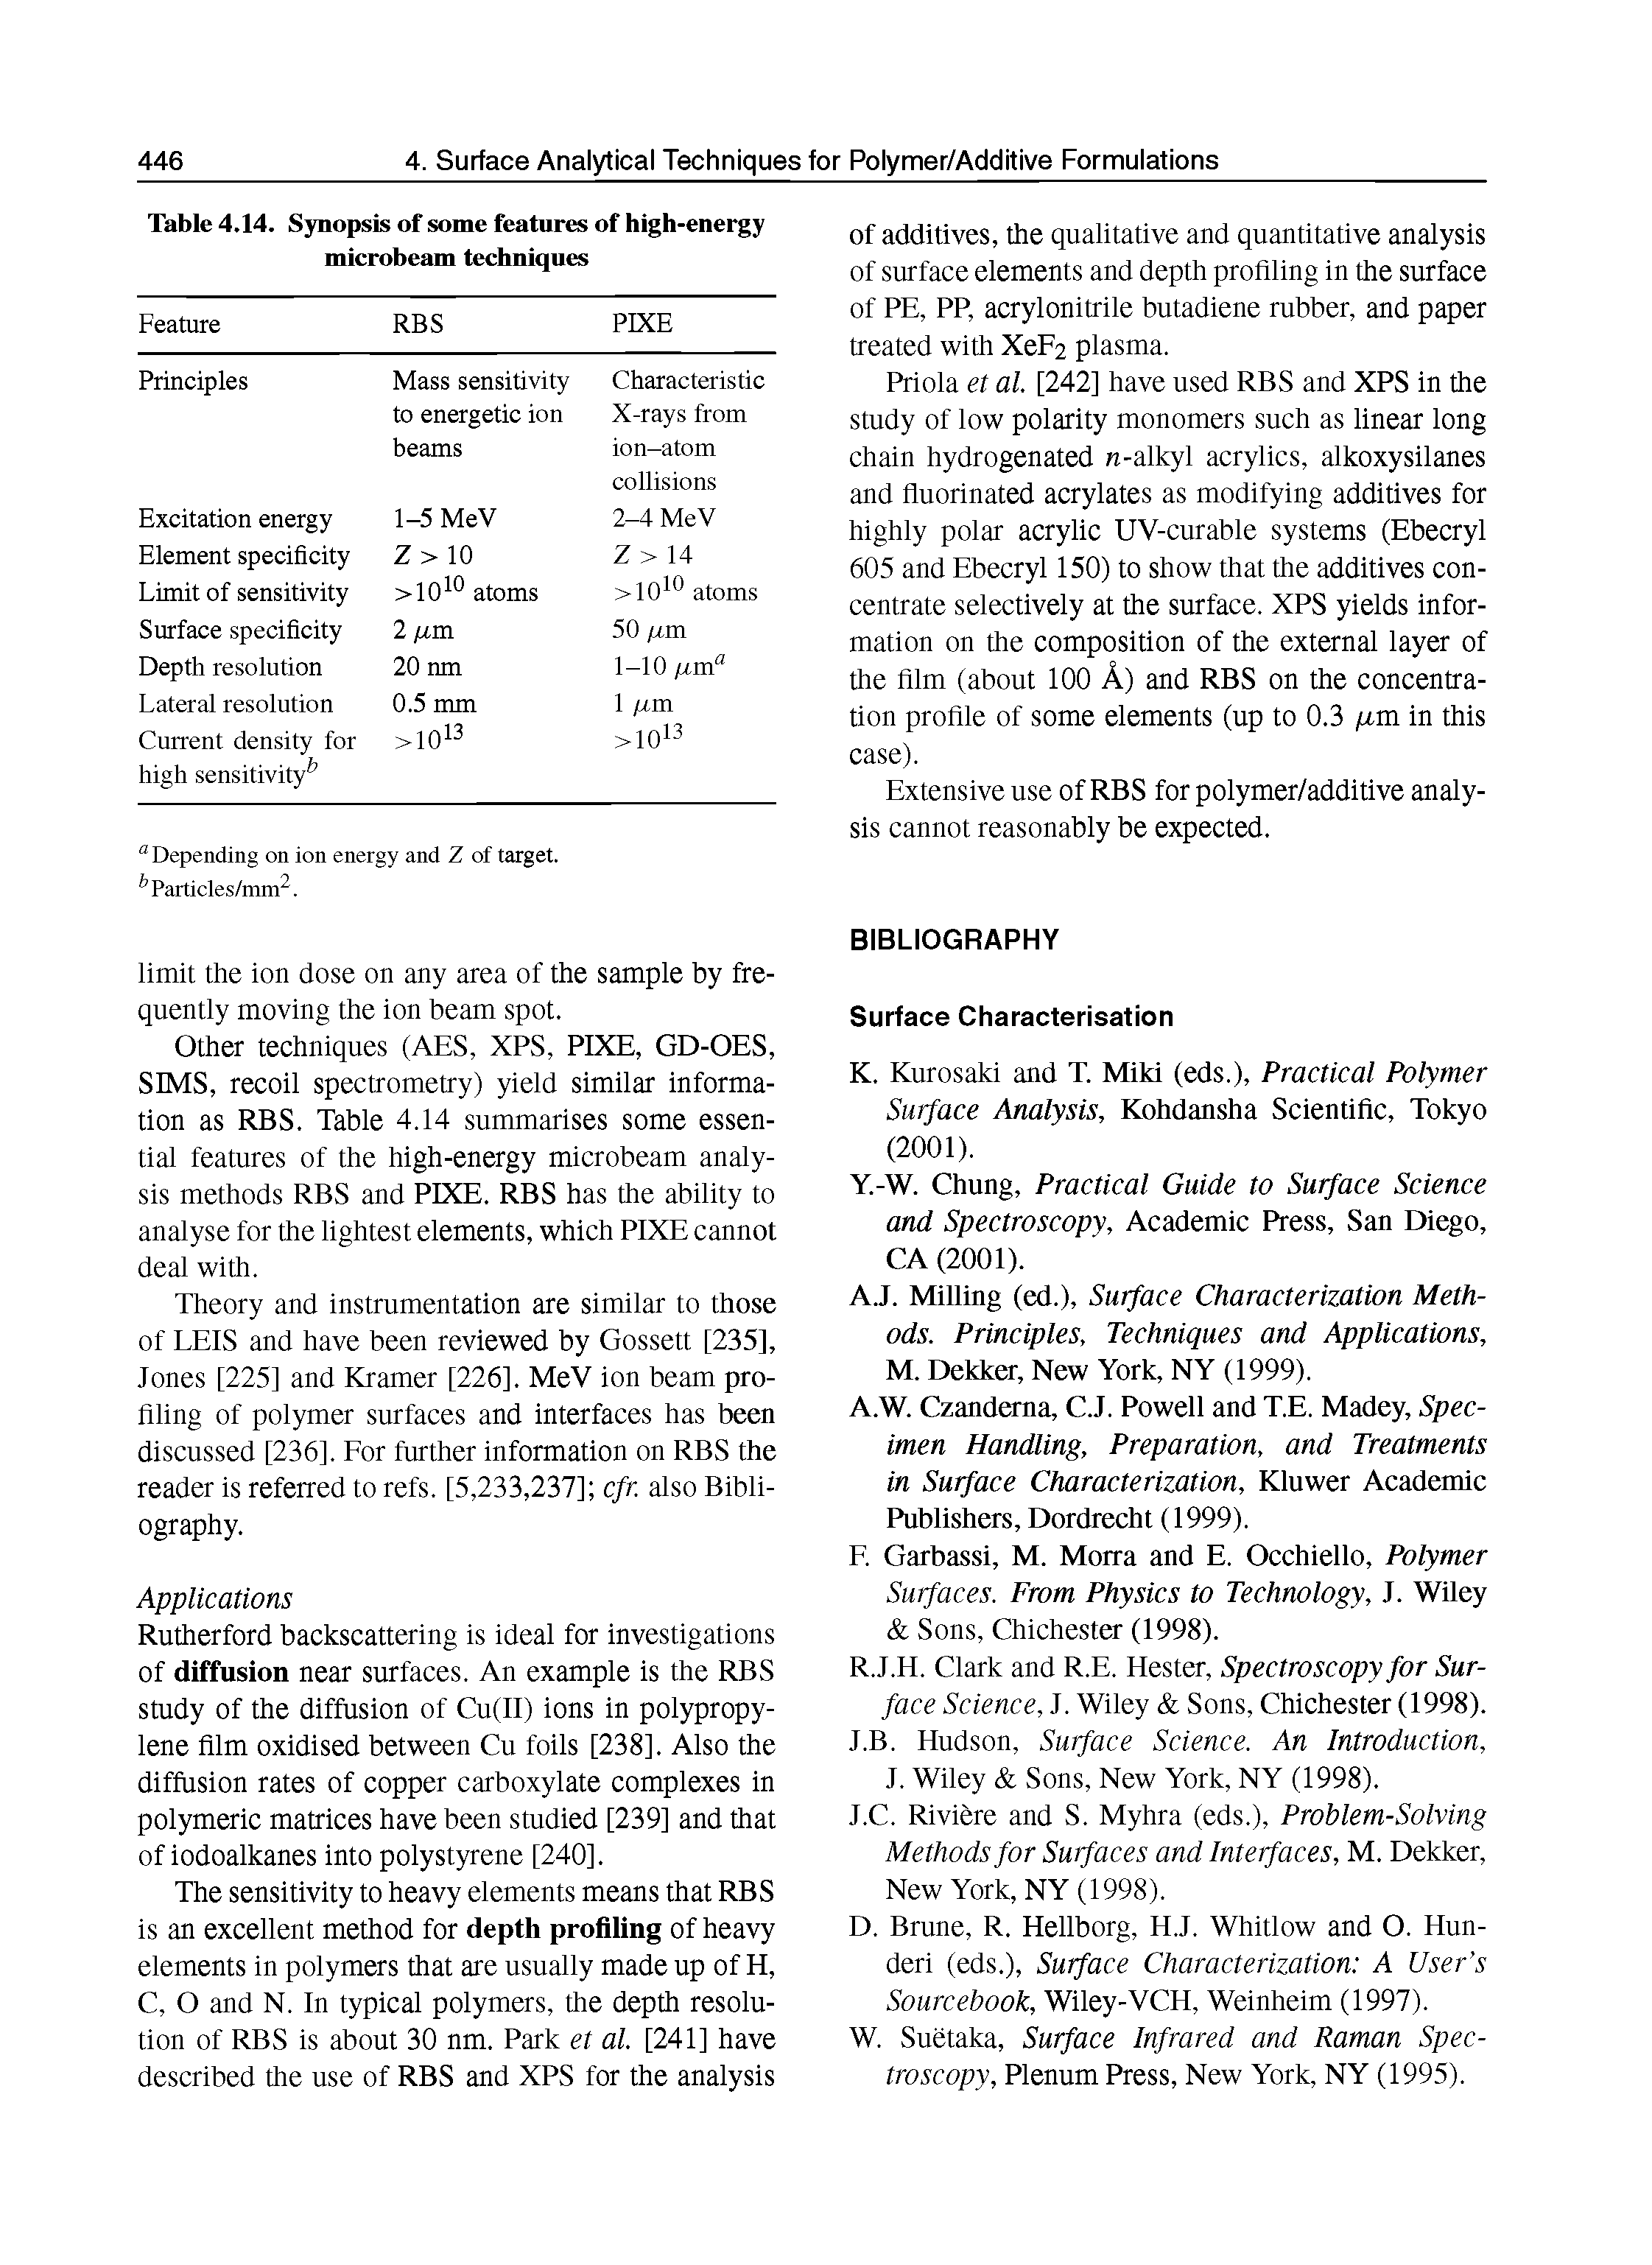 Table 4.14. Synopsis of some features of high-energy microbeam techniques...